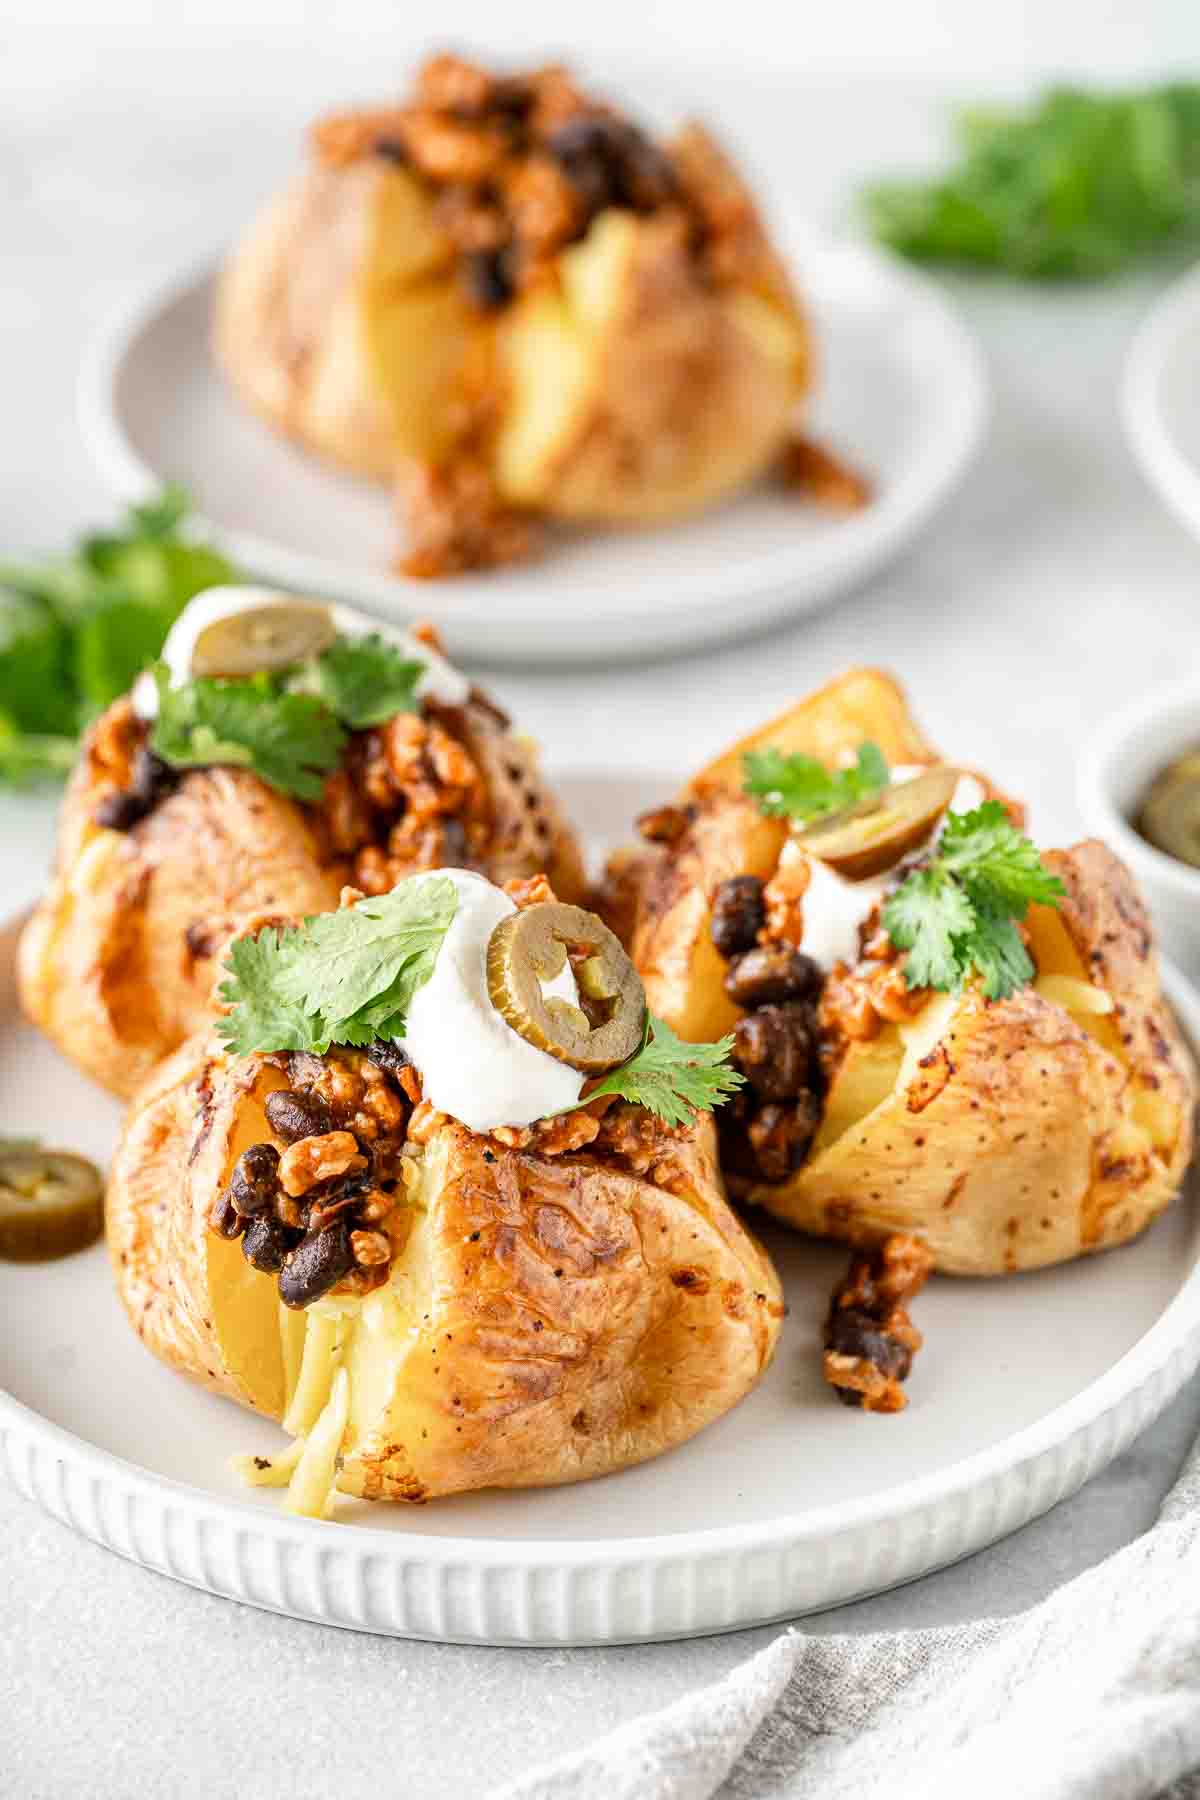 Three Mexican-style loaded potatoes on a plate.